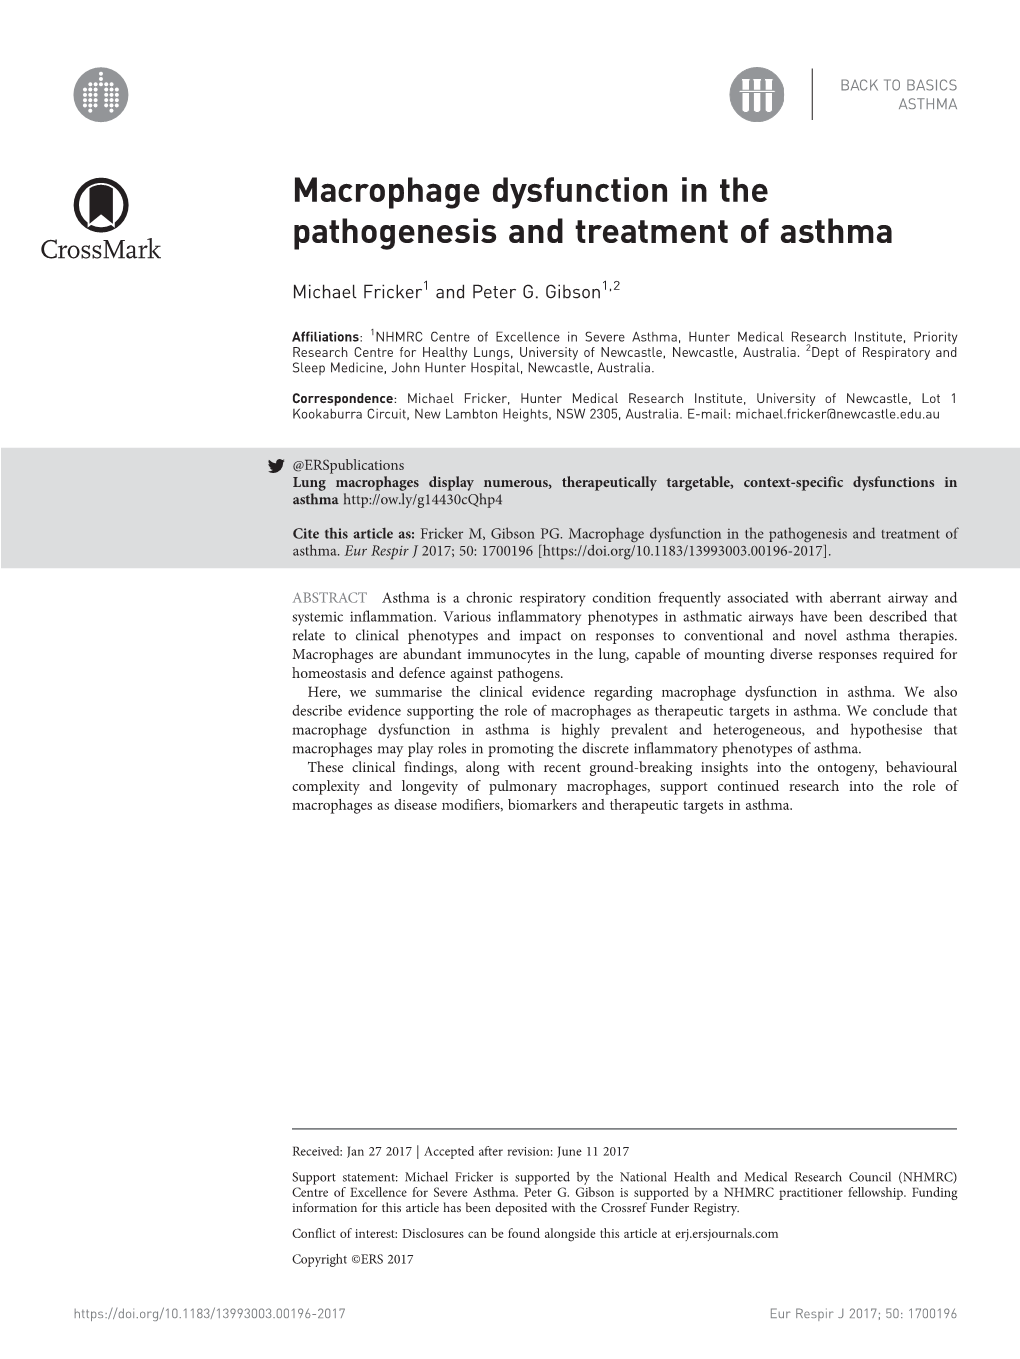 Macrophage Dysfunction in the Pathogenesis and Treatment of Asthma